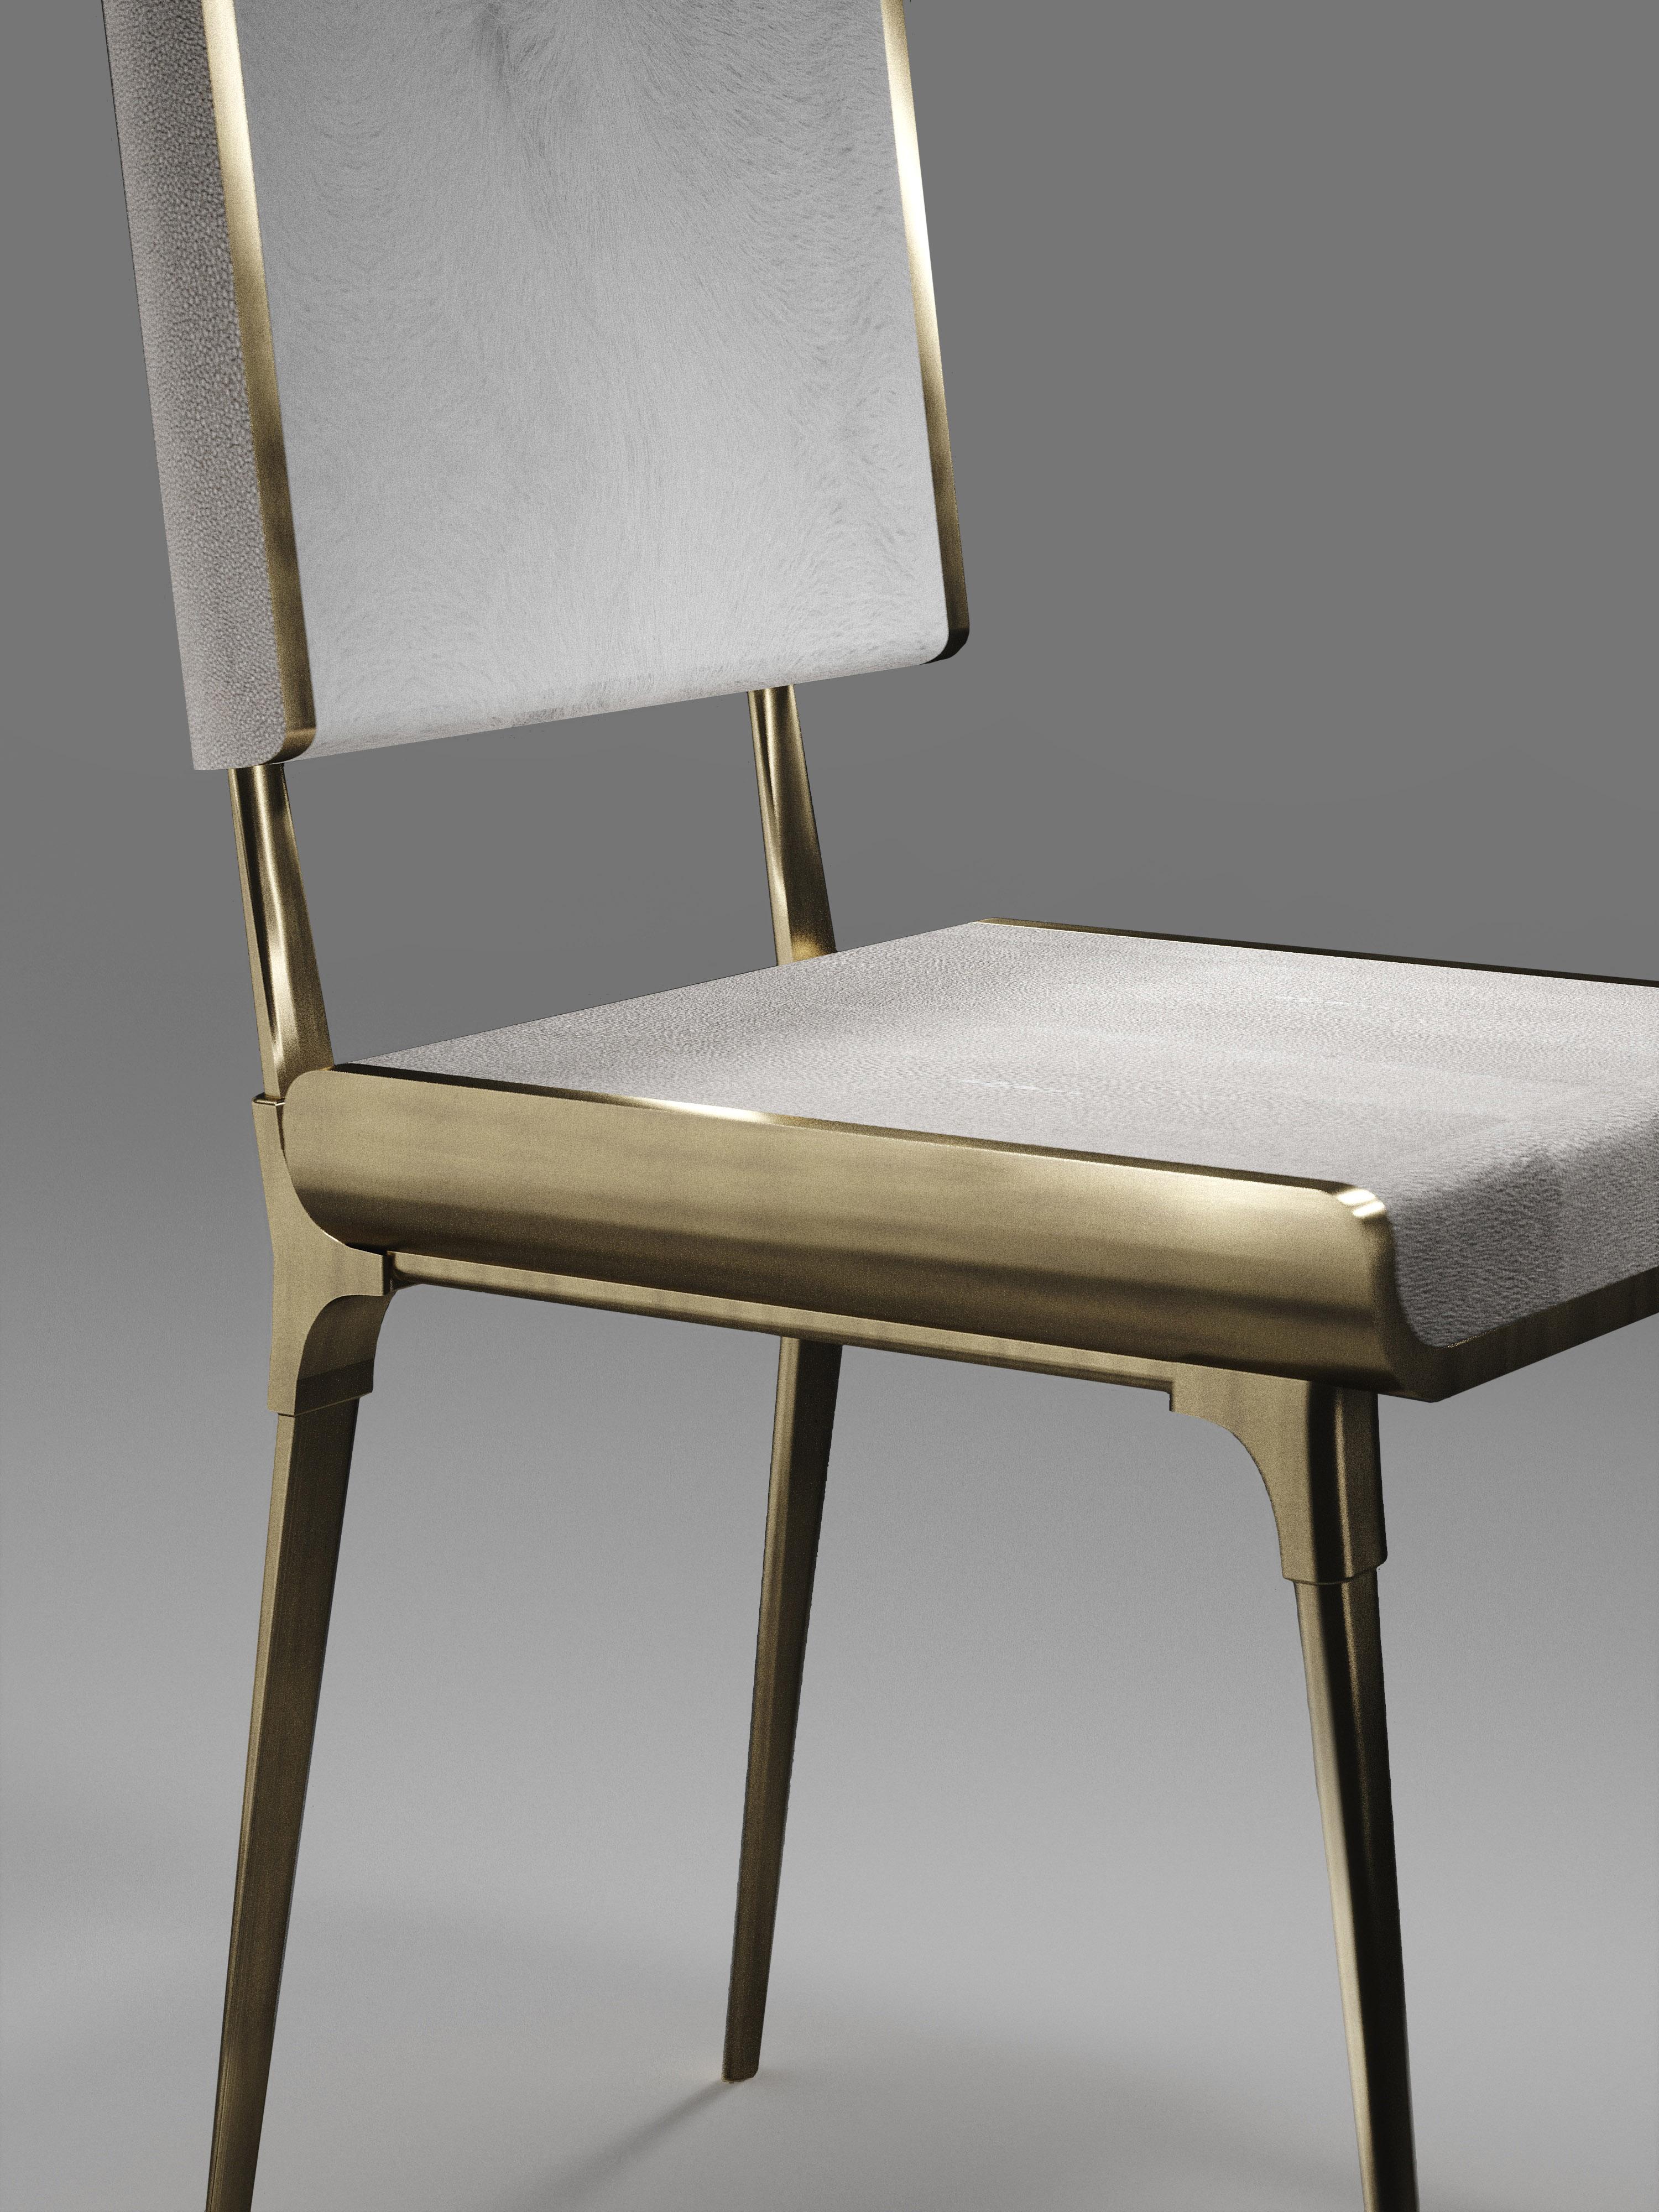 Shagreen Chair with Palmwood and Bronze-Patina Brass Details by Kifu Paris For Sale 6